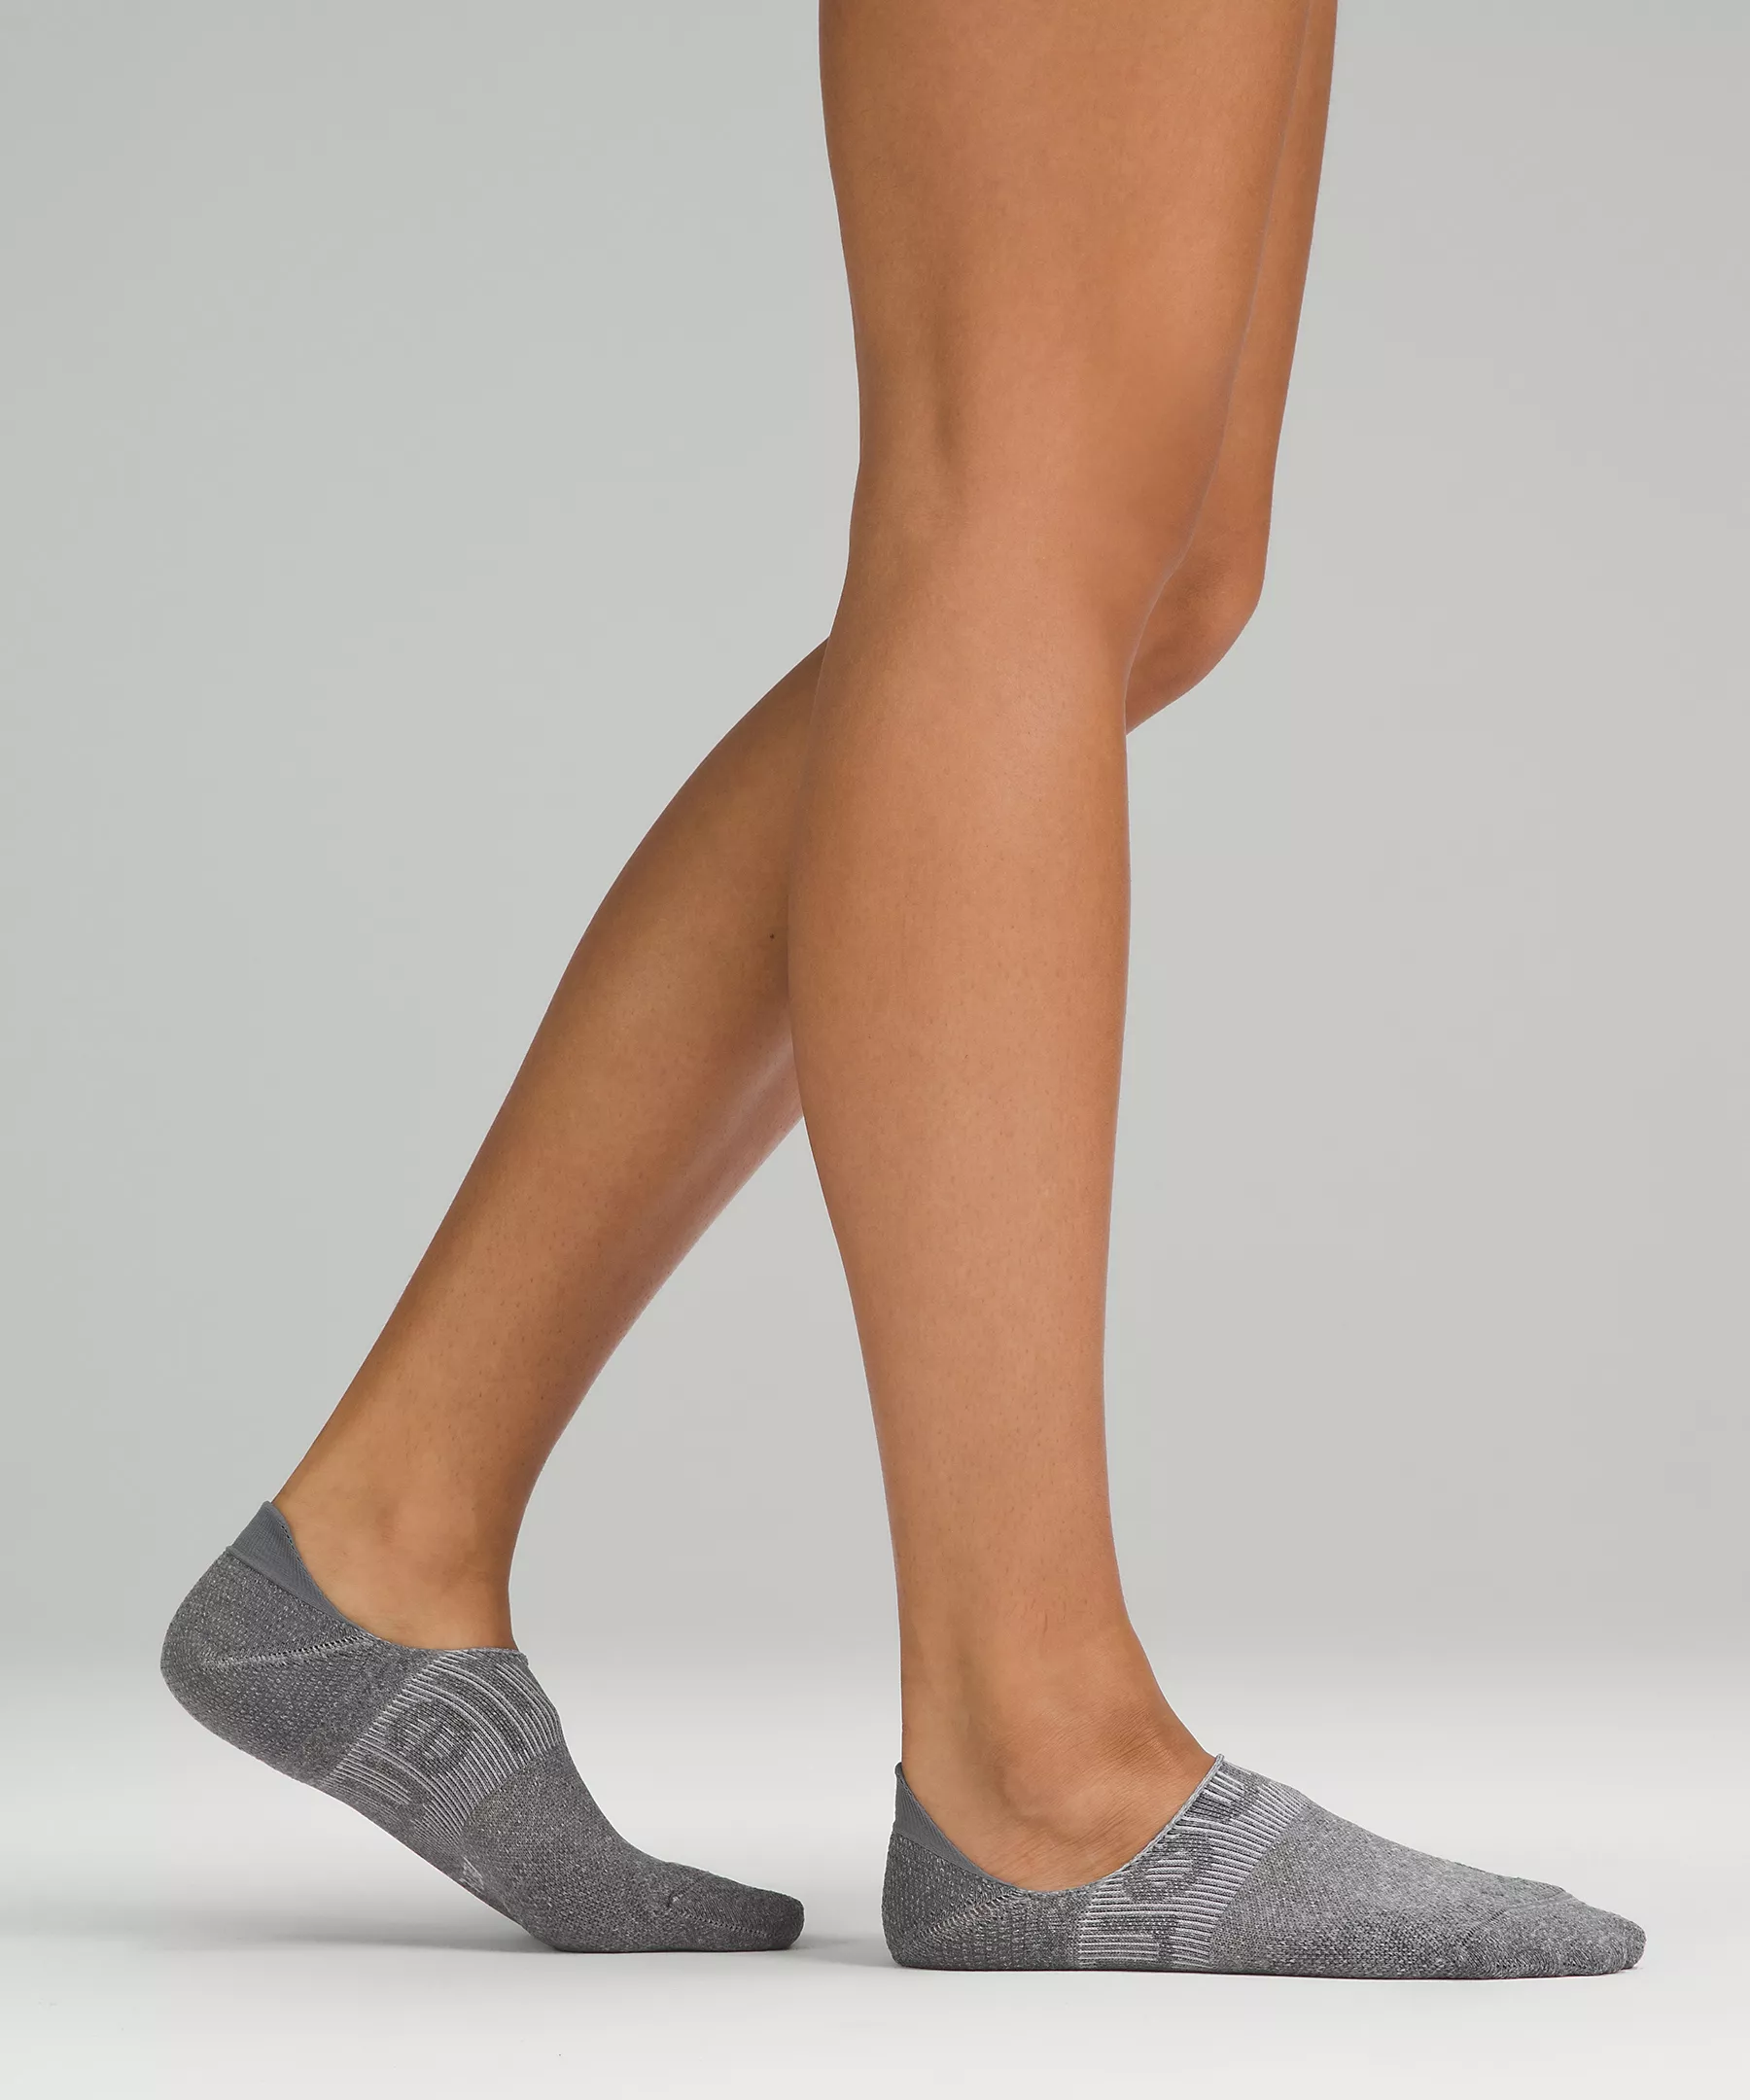 Lululemon’s Power Stride No-Show Sock with Active Grip